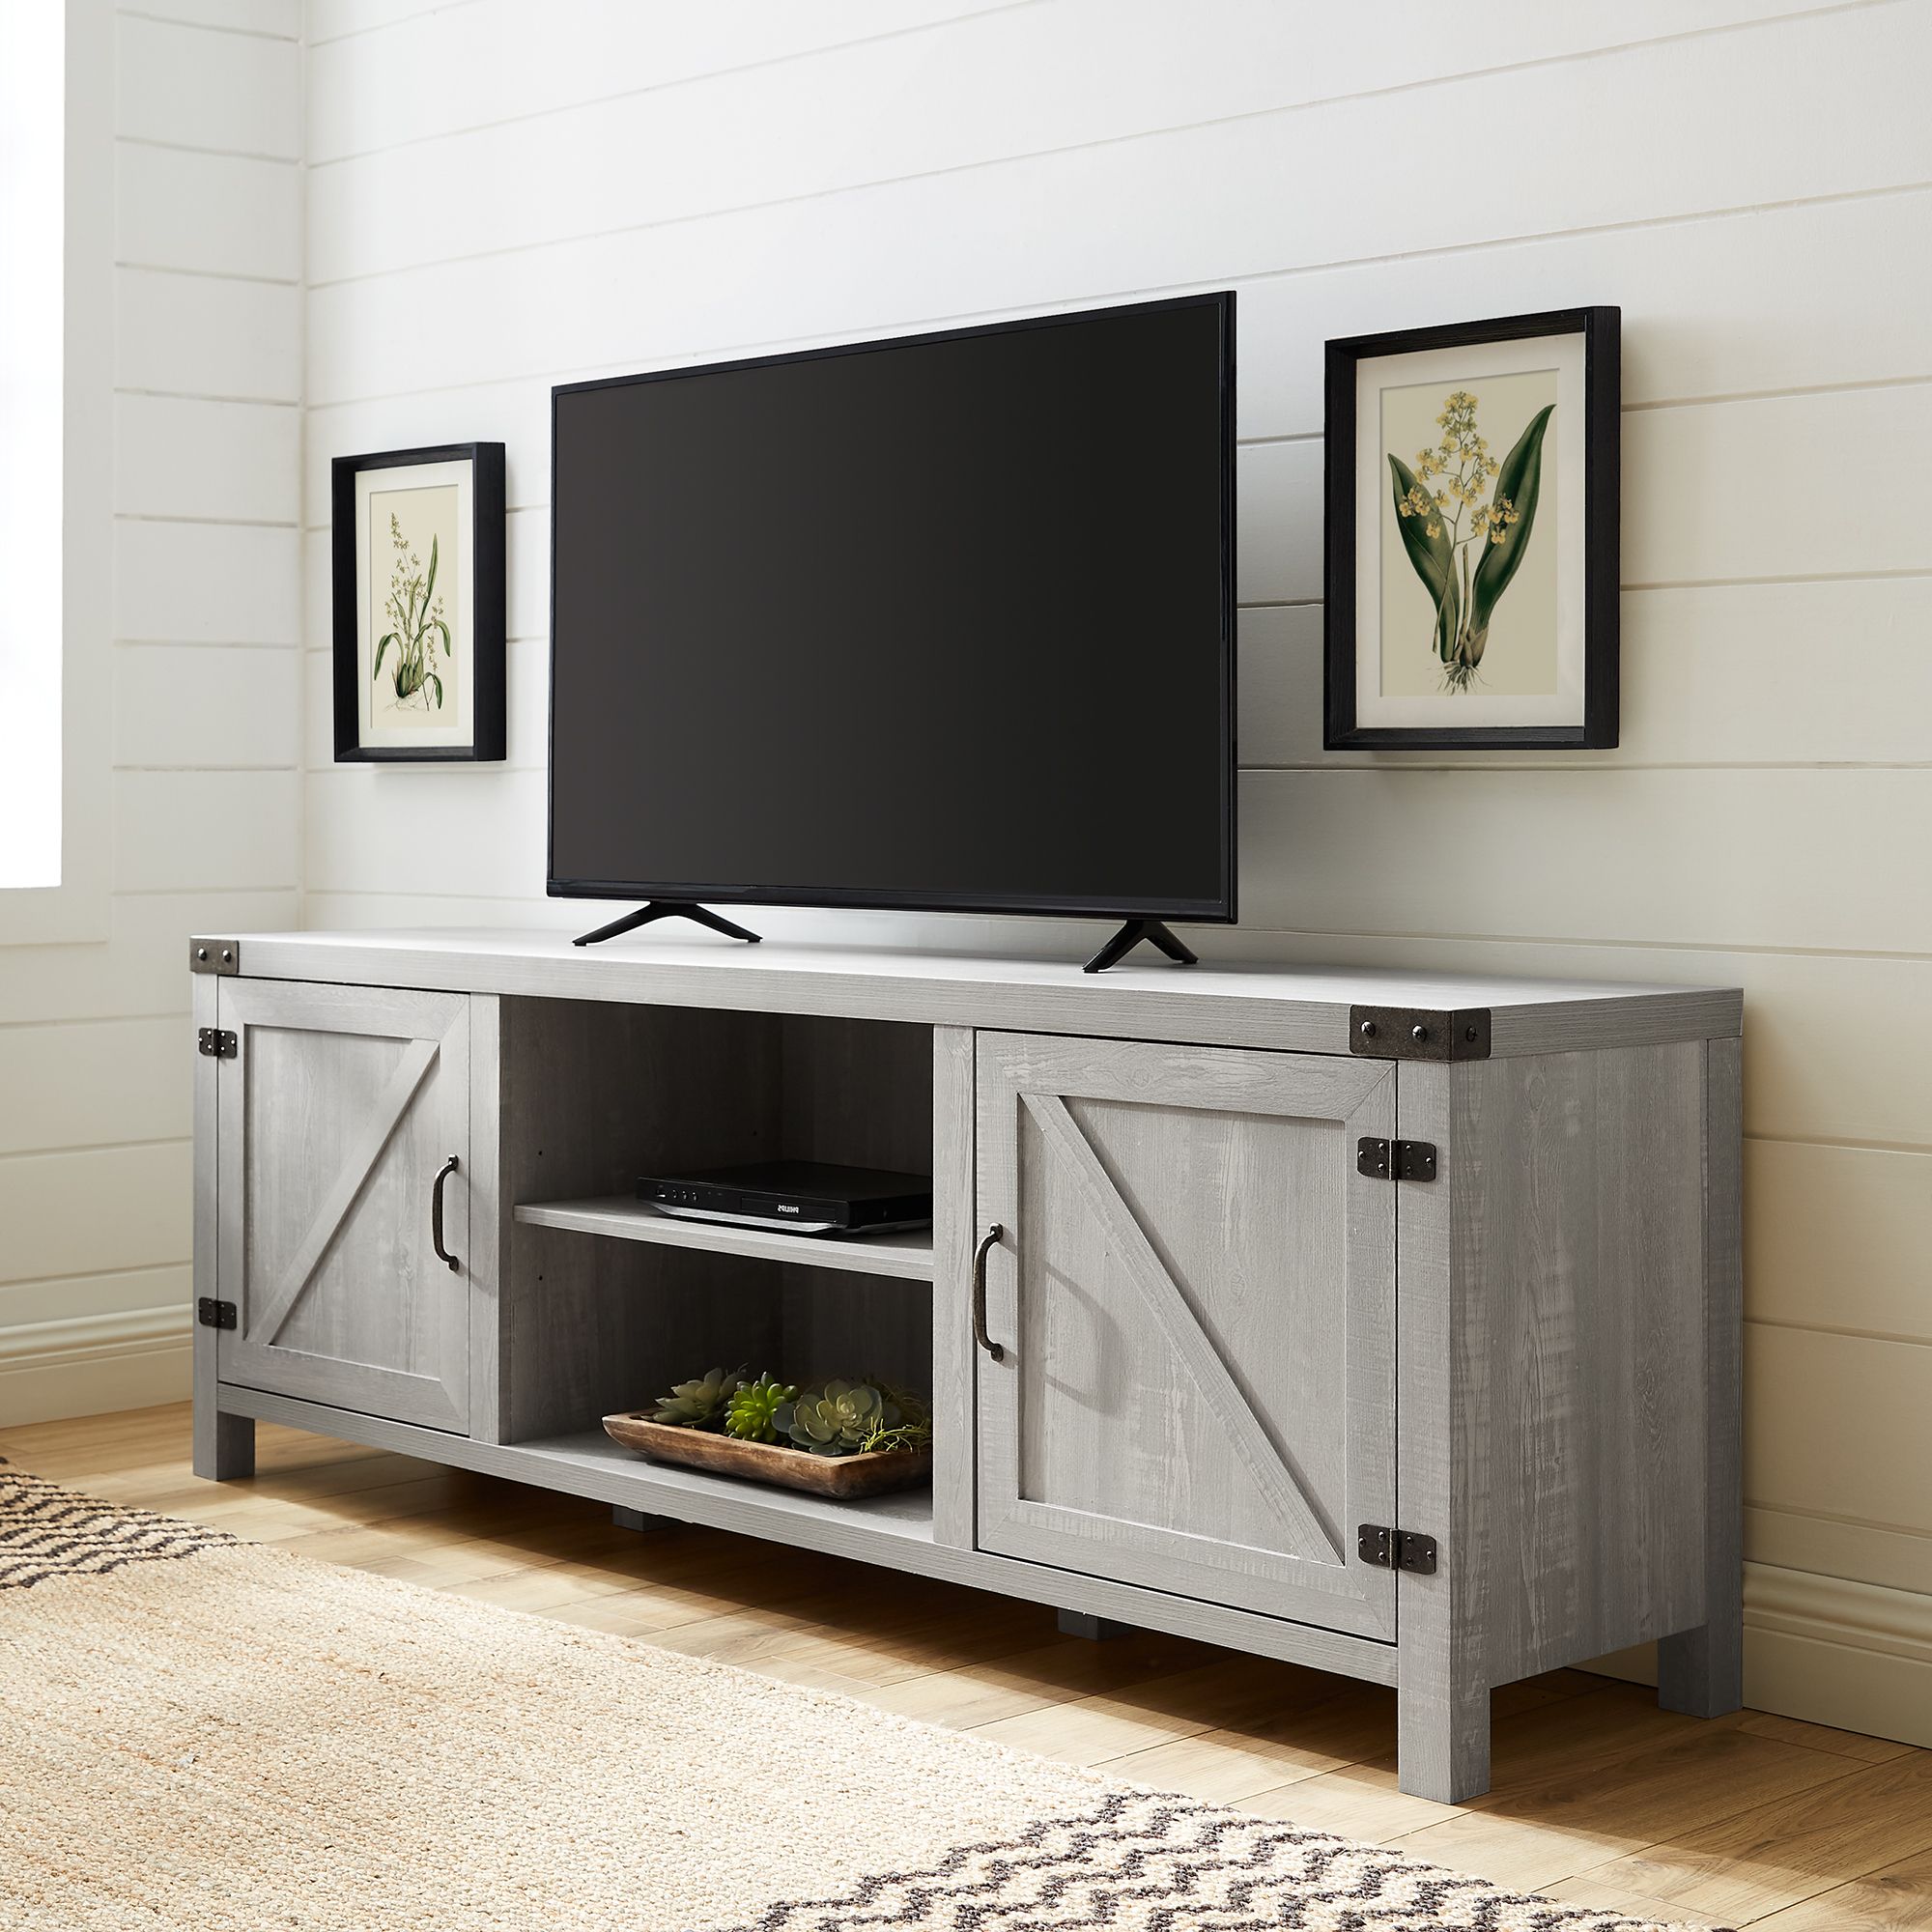 Woven Paths Farmhouse Barn Door Tv Stand For Tvs Up To 80 For Kamari Tv Stands For Tvs Up To 58" (Gallery 1 of 20)